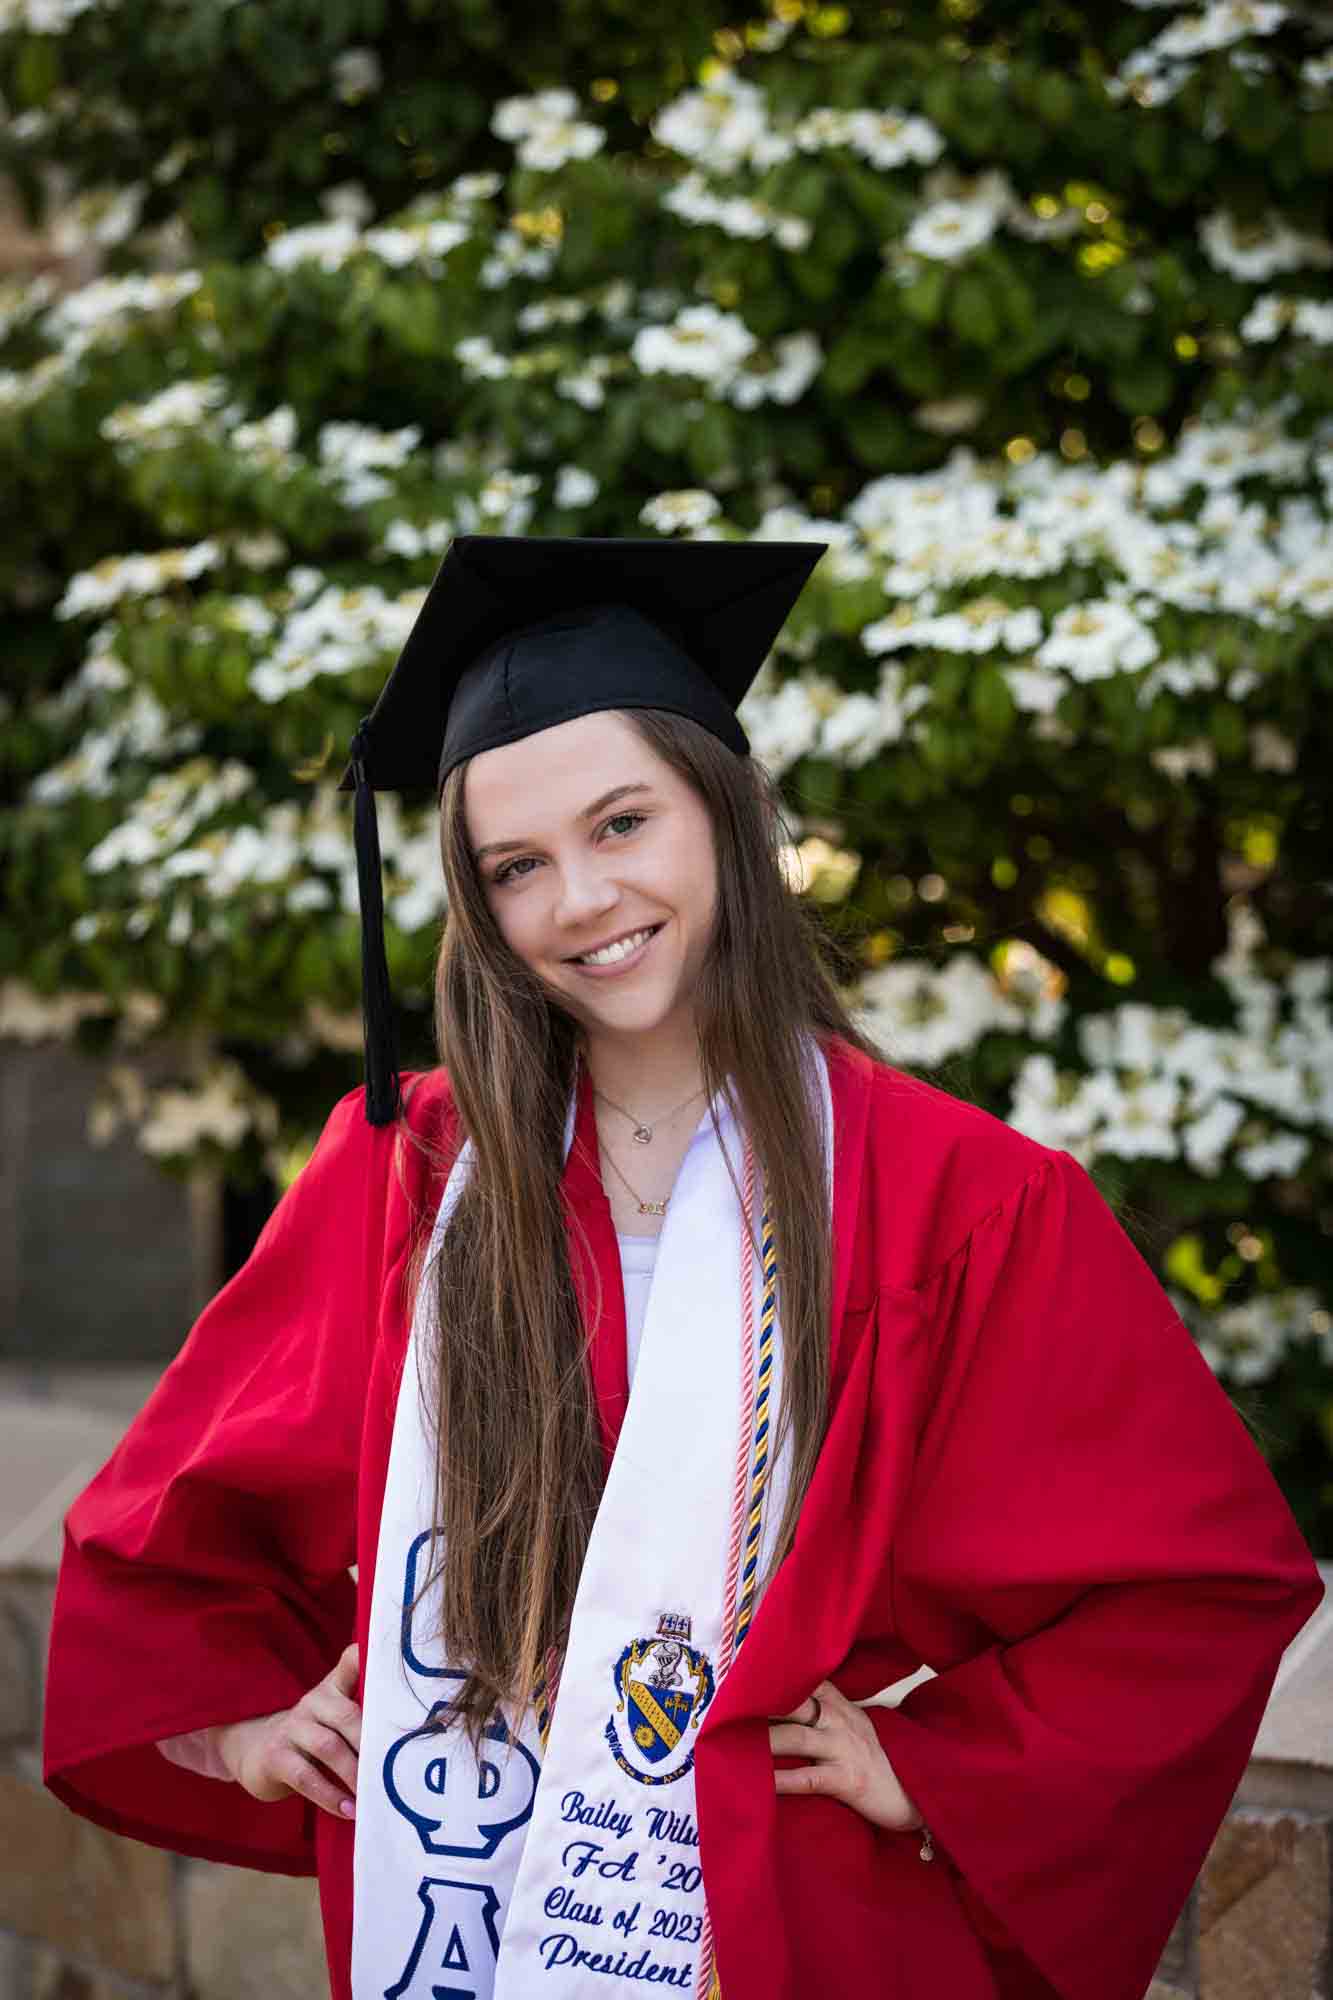 Female graduate in front of white flowering bush wearing red robe and graduation cap for an article on graduation portrait photo tips